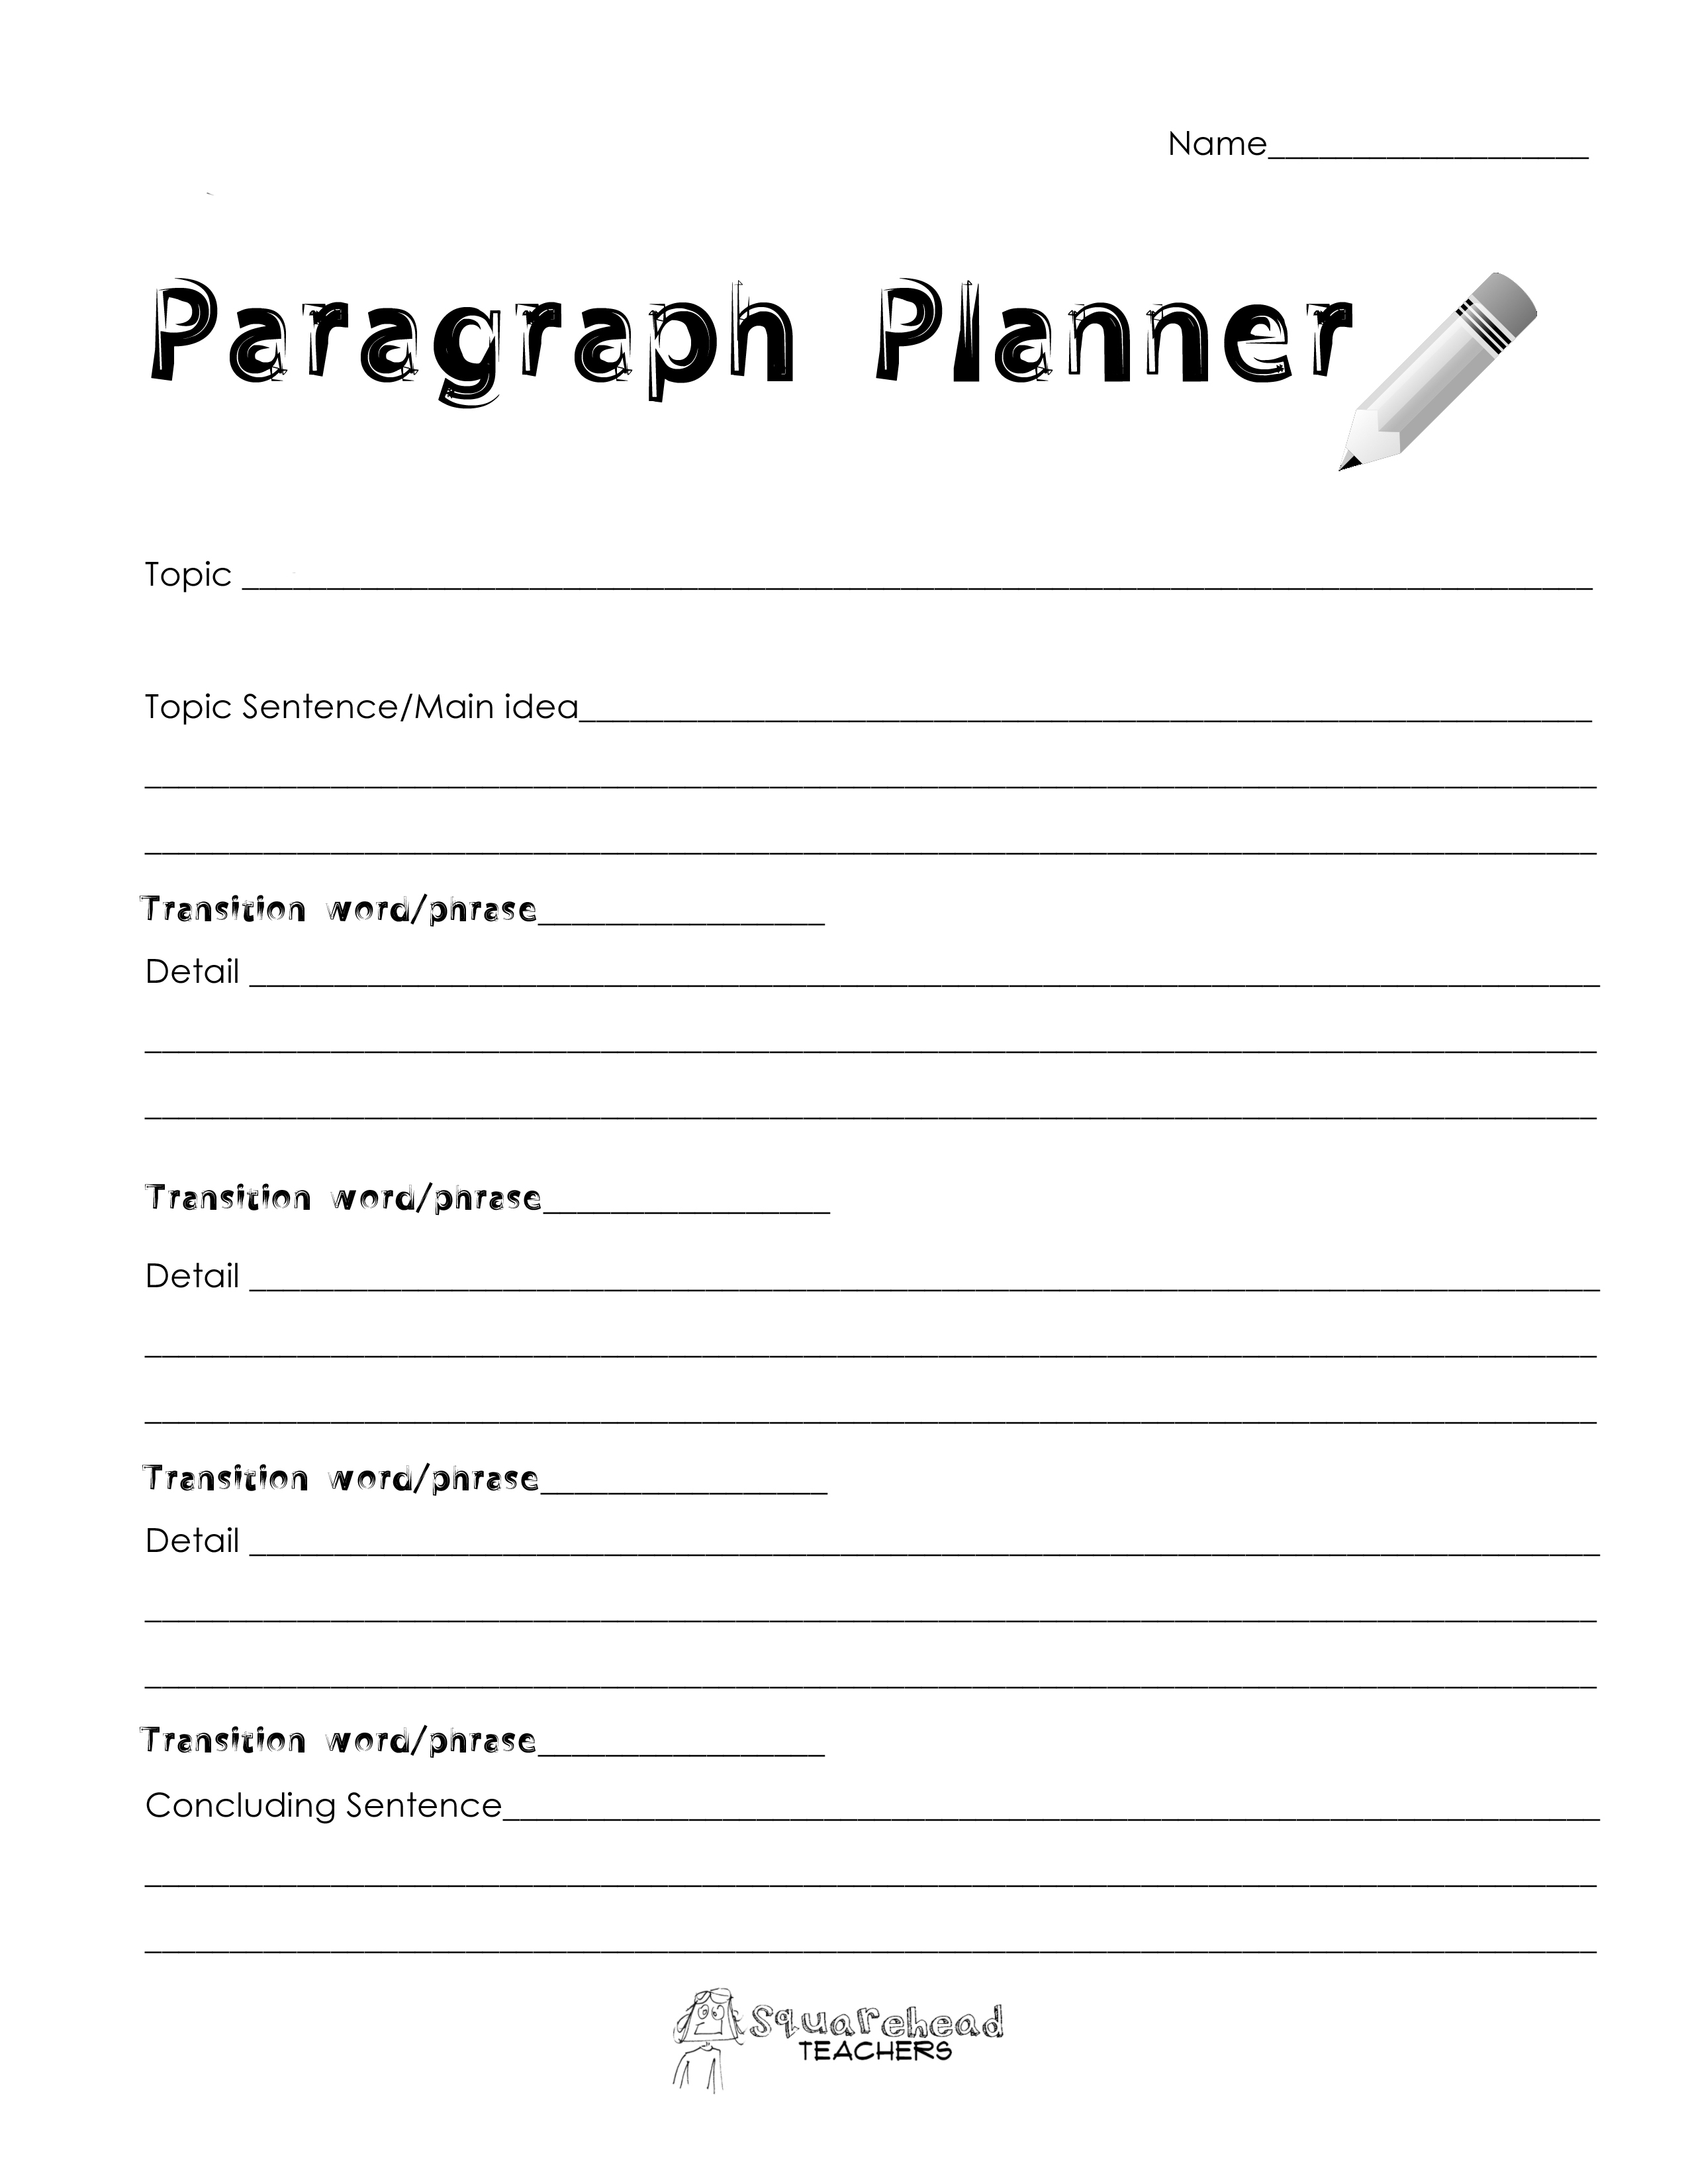 writing-a-paragraph-graphic-organizer